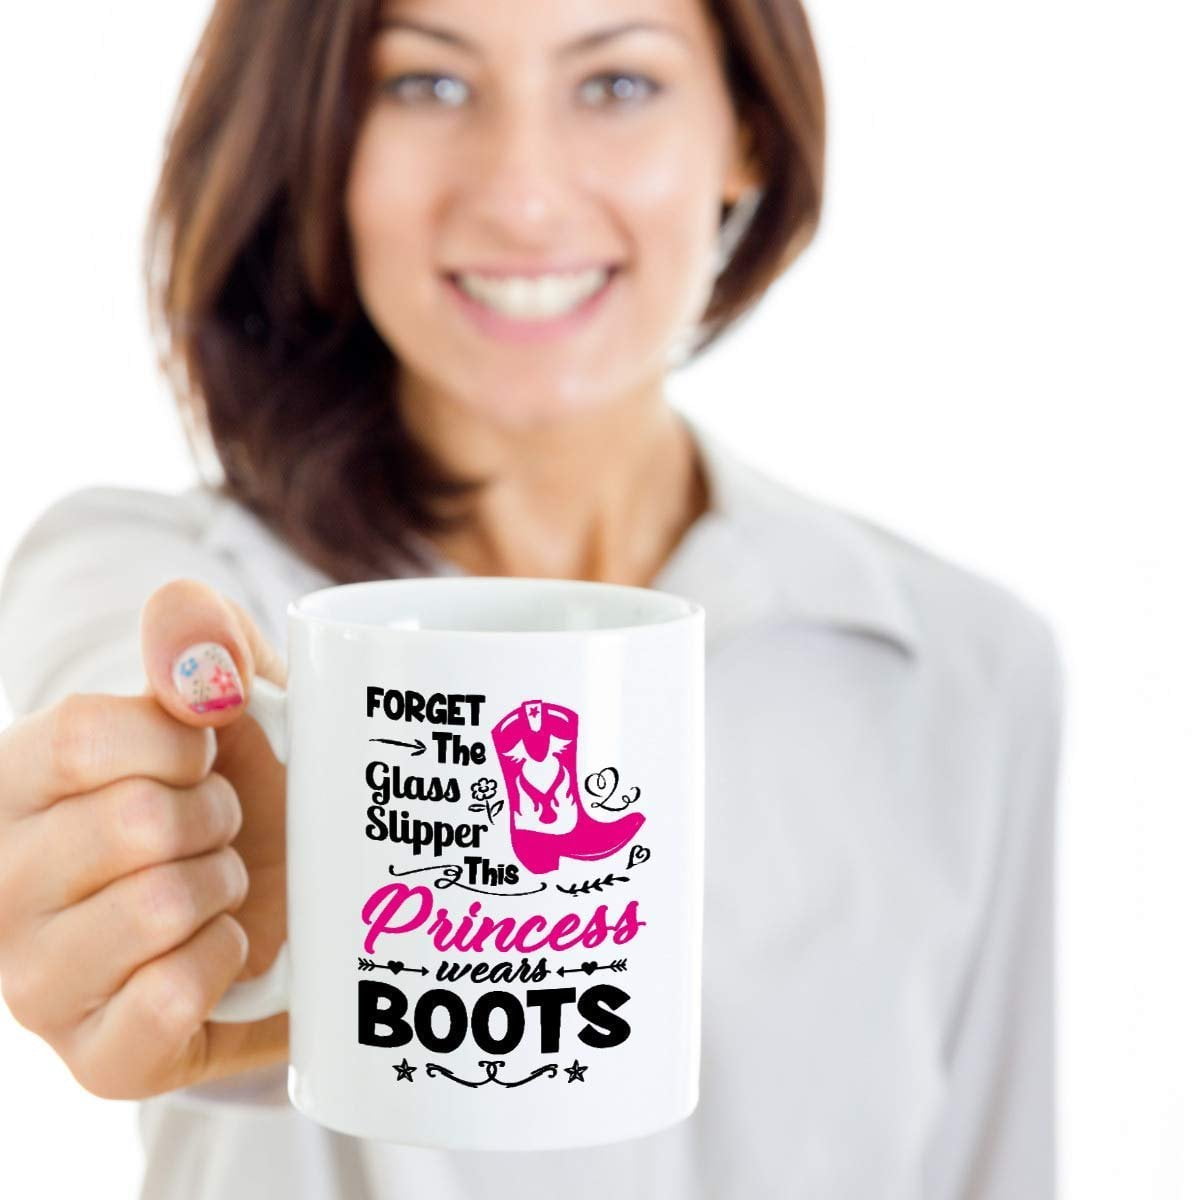 Funny Coffee Mug Forget The Glass Slippers This Princess Wears Tactical Boots Novelty Cup Idea For Her Women Military Police Firefighter Girl 1.5 Oz Black Shot Glass 0NJR9H